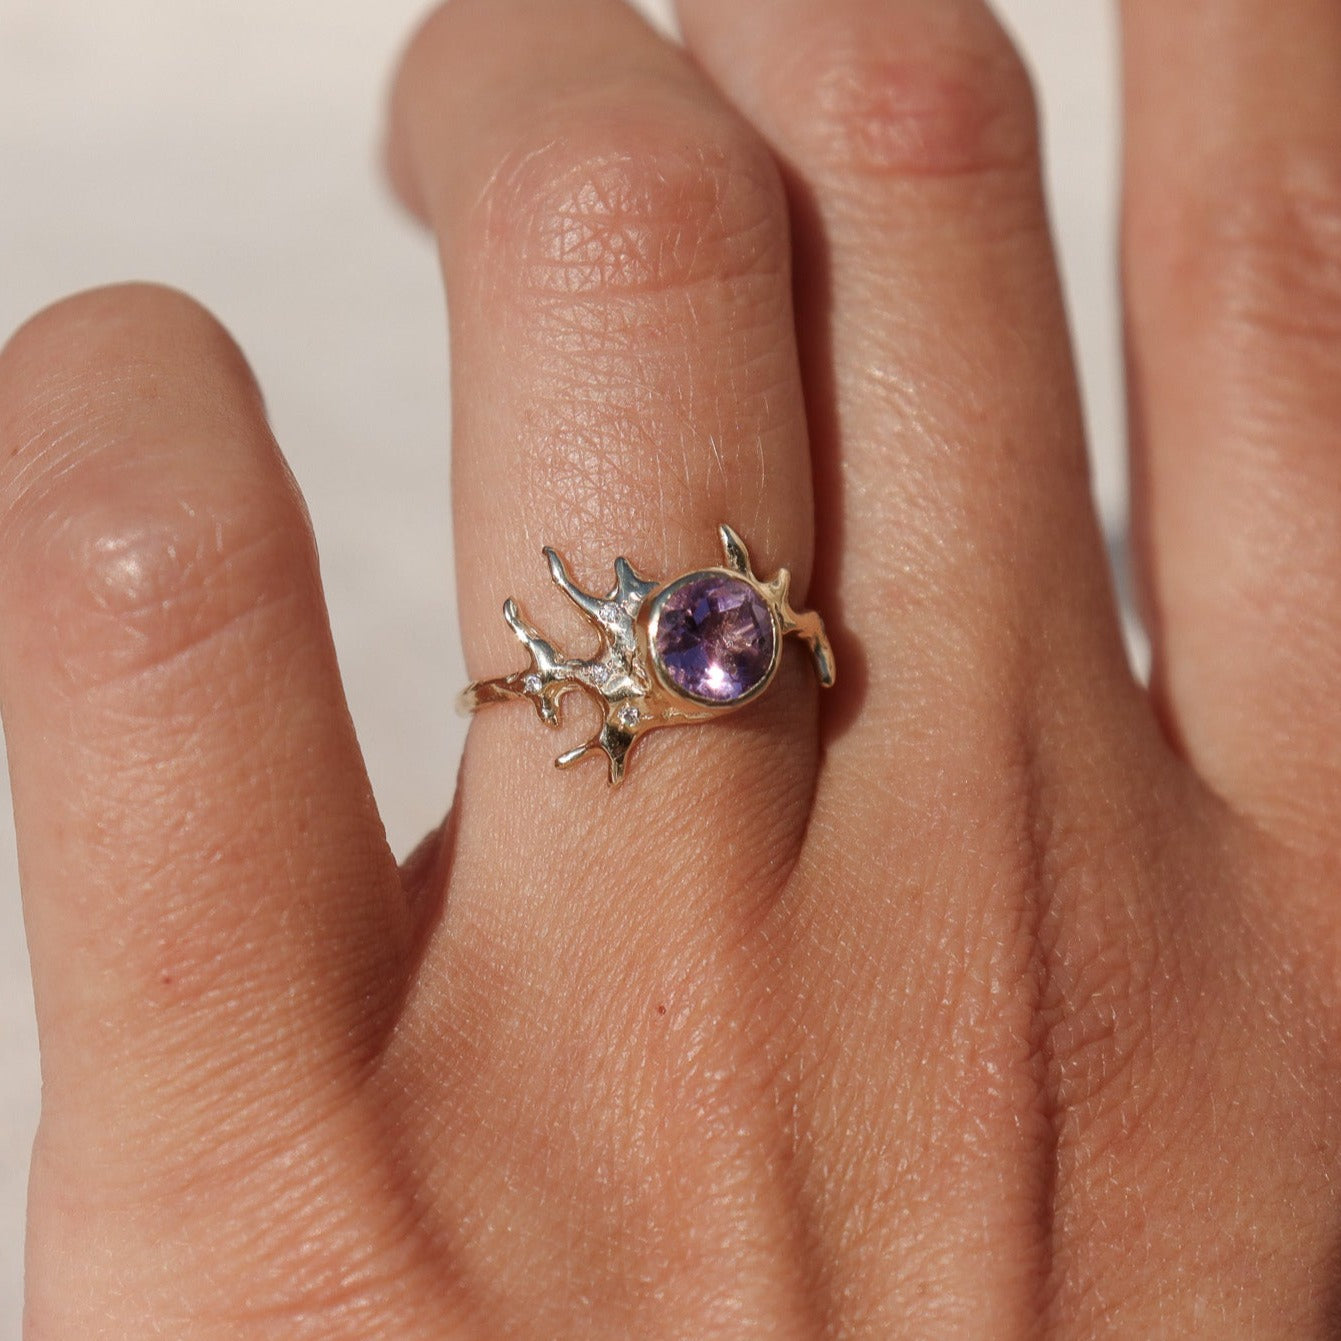 Exquisite round brilliant cut ametrine gemstone, bezel-set in a gold band with an organic coral-like design, adorned with sparkling diamond accents, shown on a  finger to depict scale.